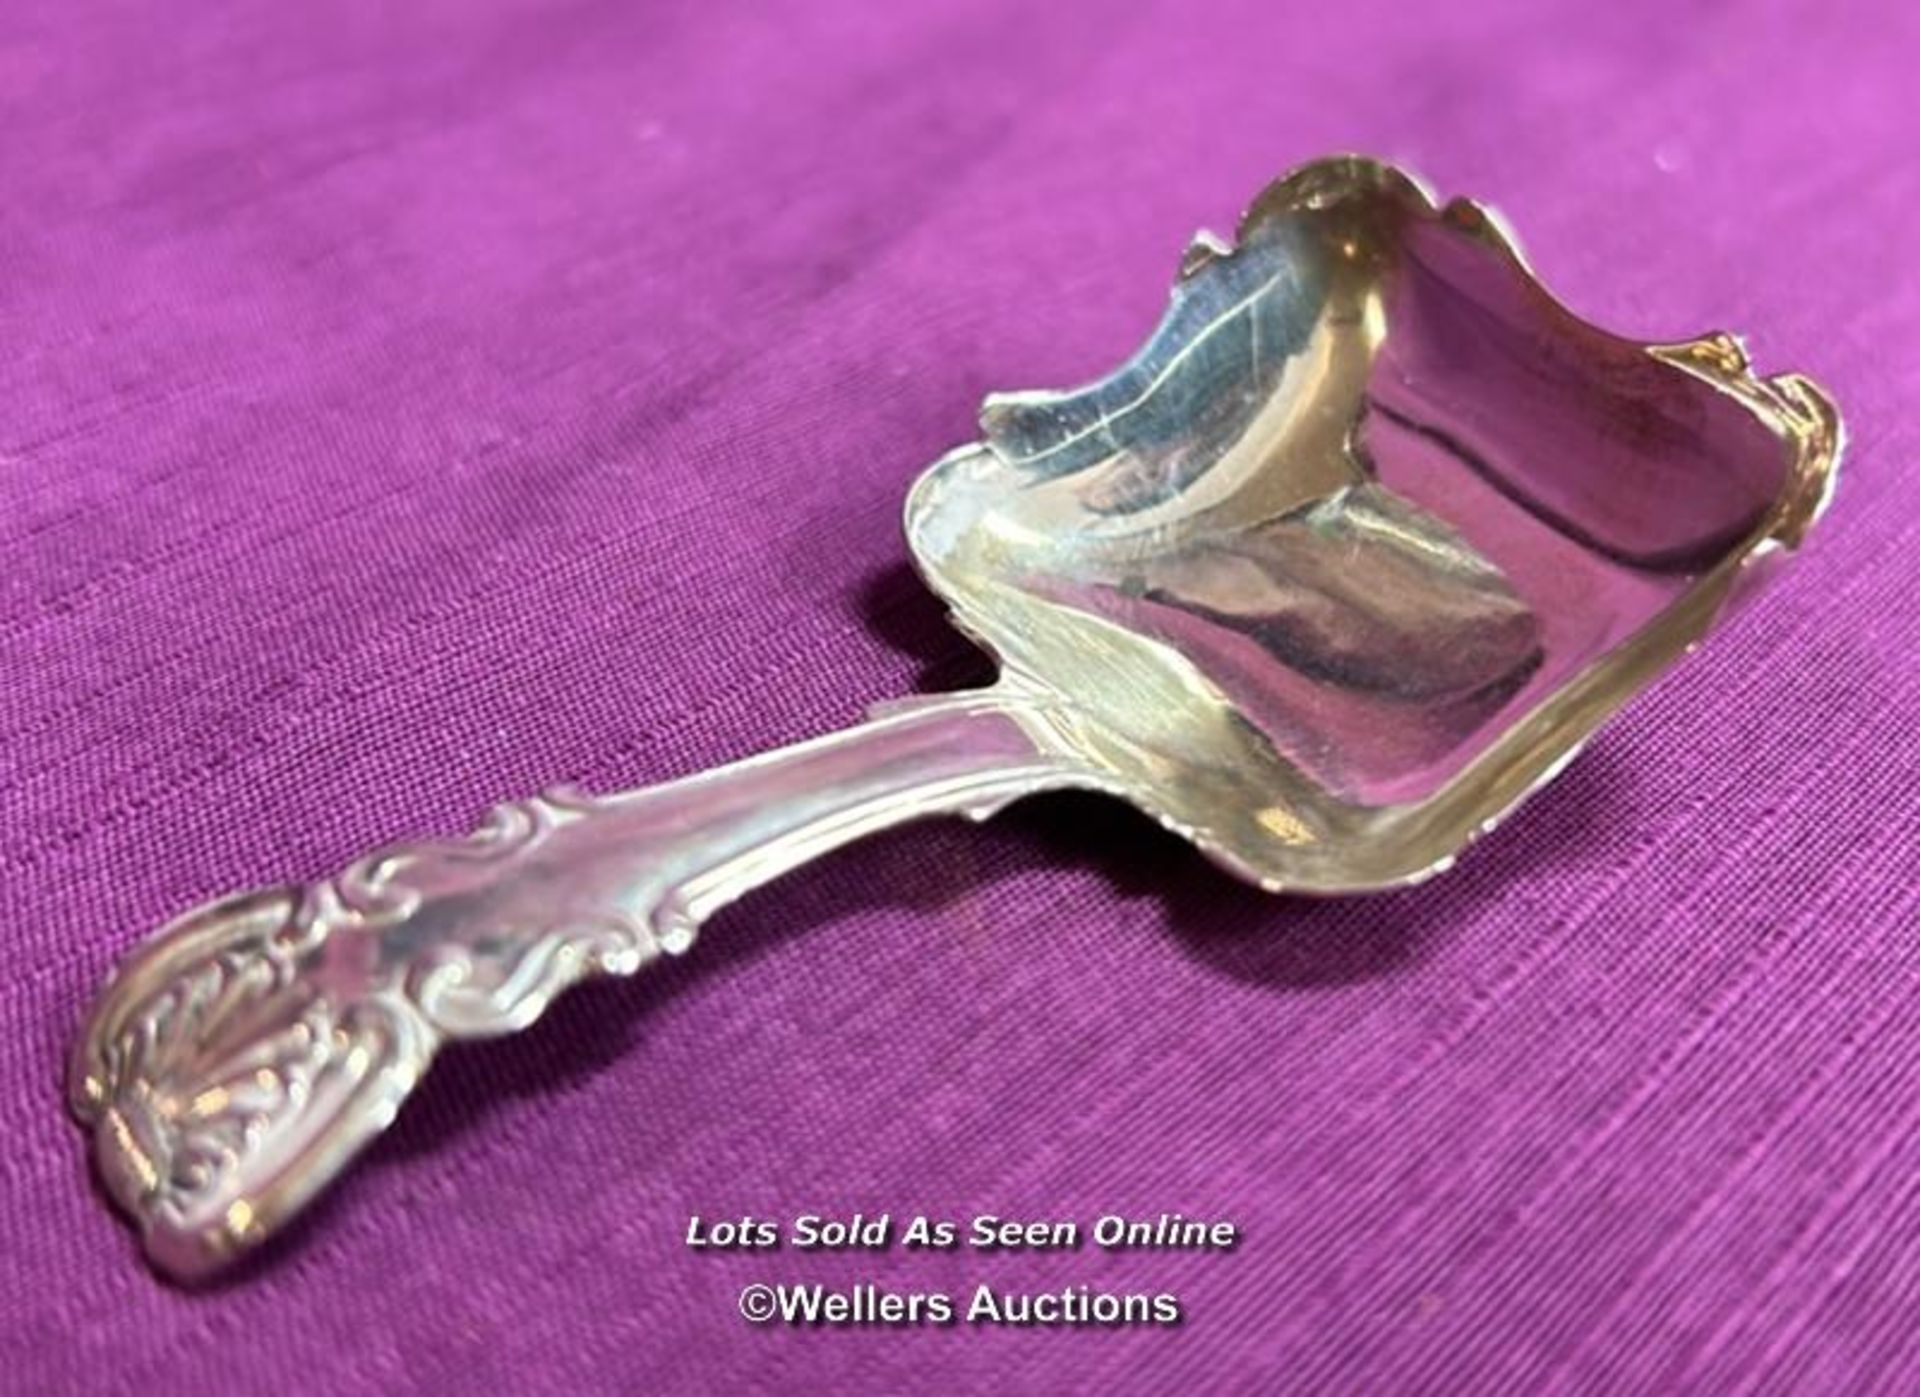 SMALL HALLMARKED SILVER SQUARE SPOON, LENGTH 7CM, WEIGHT 10GMS - Image 6 of 6